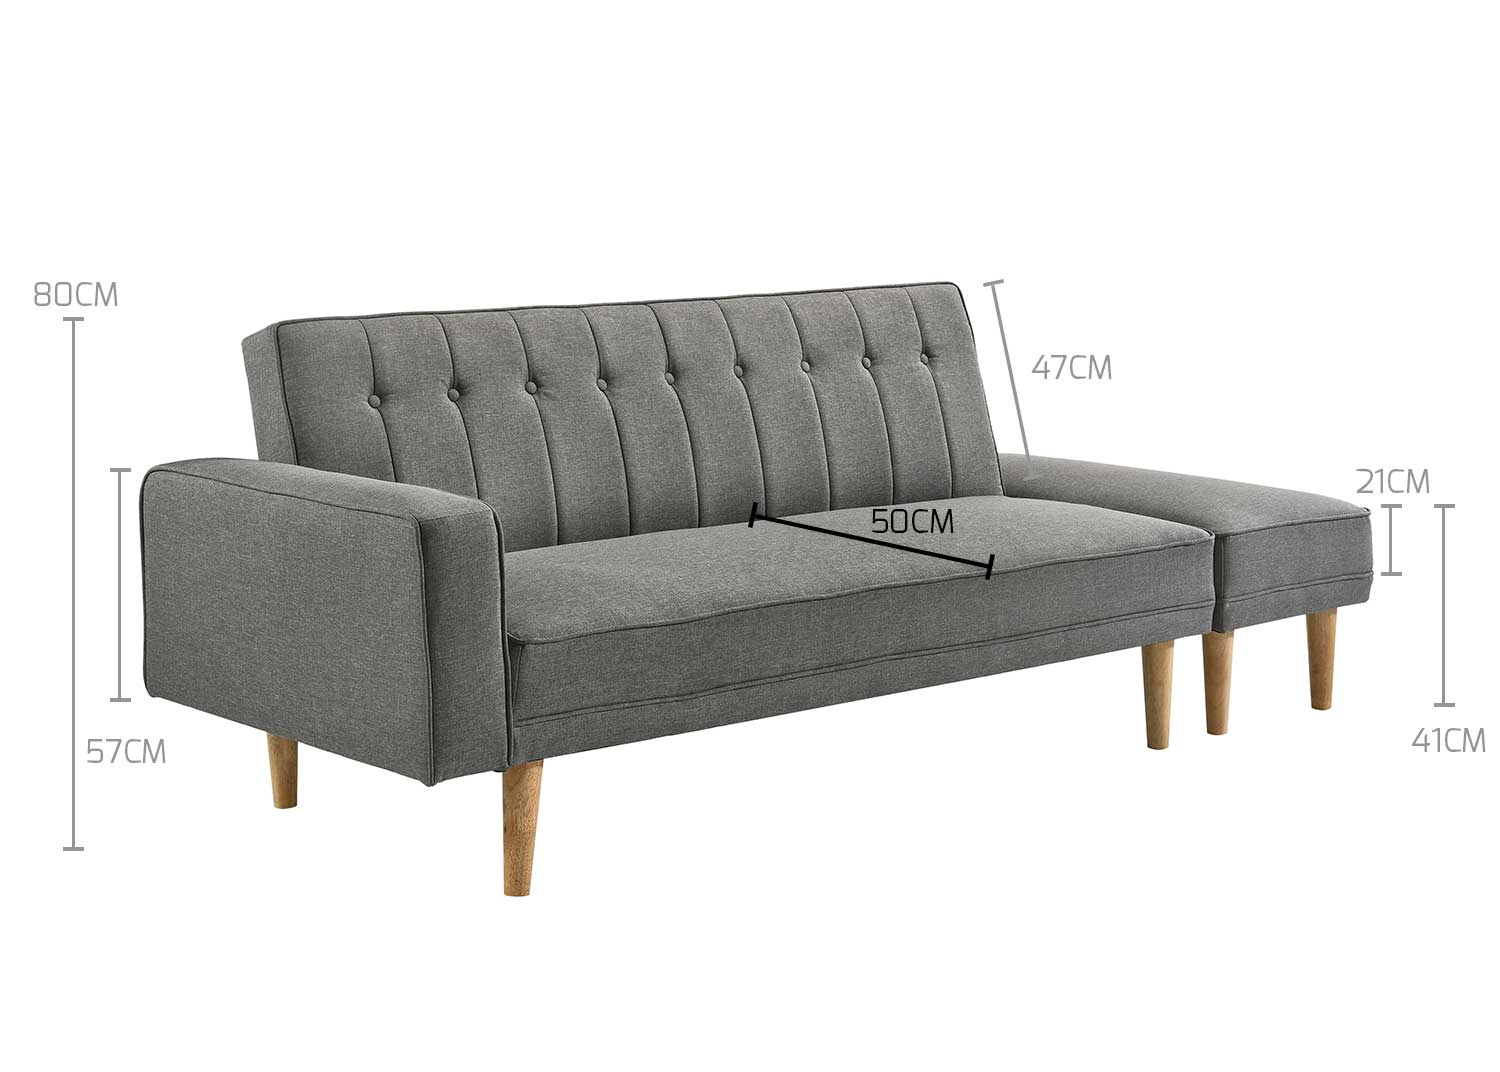 Furniture 3 Seater Fabric Sofa Bed with Ottoman - Light Grey